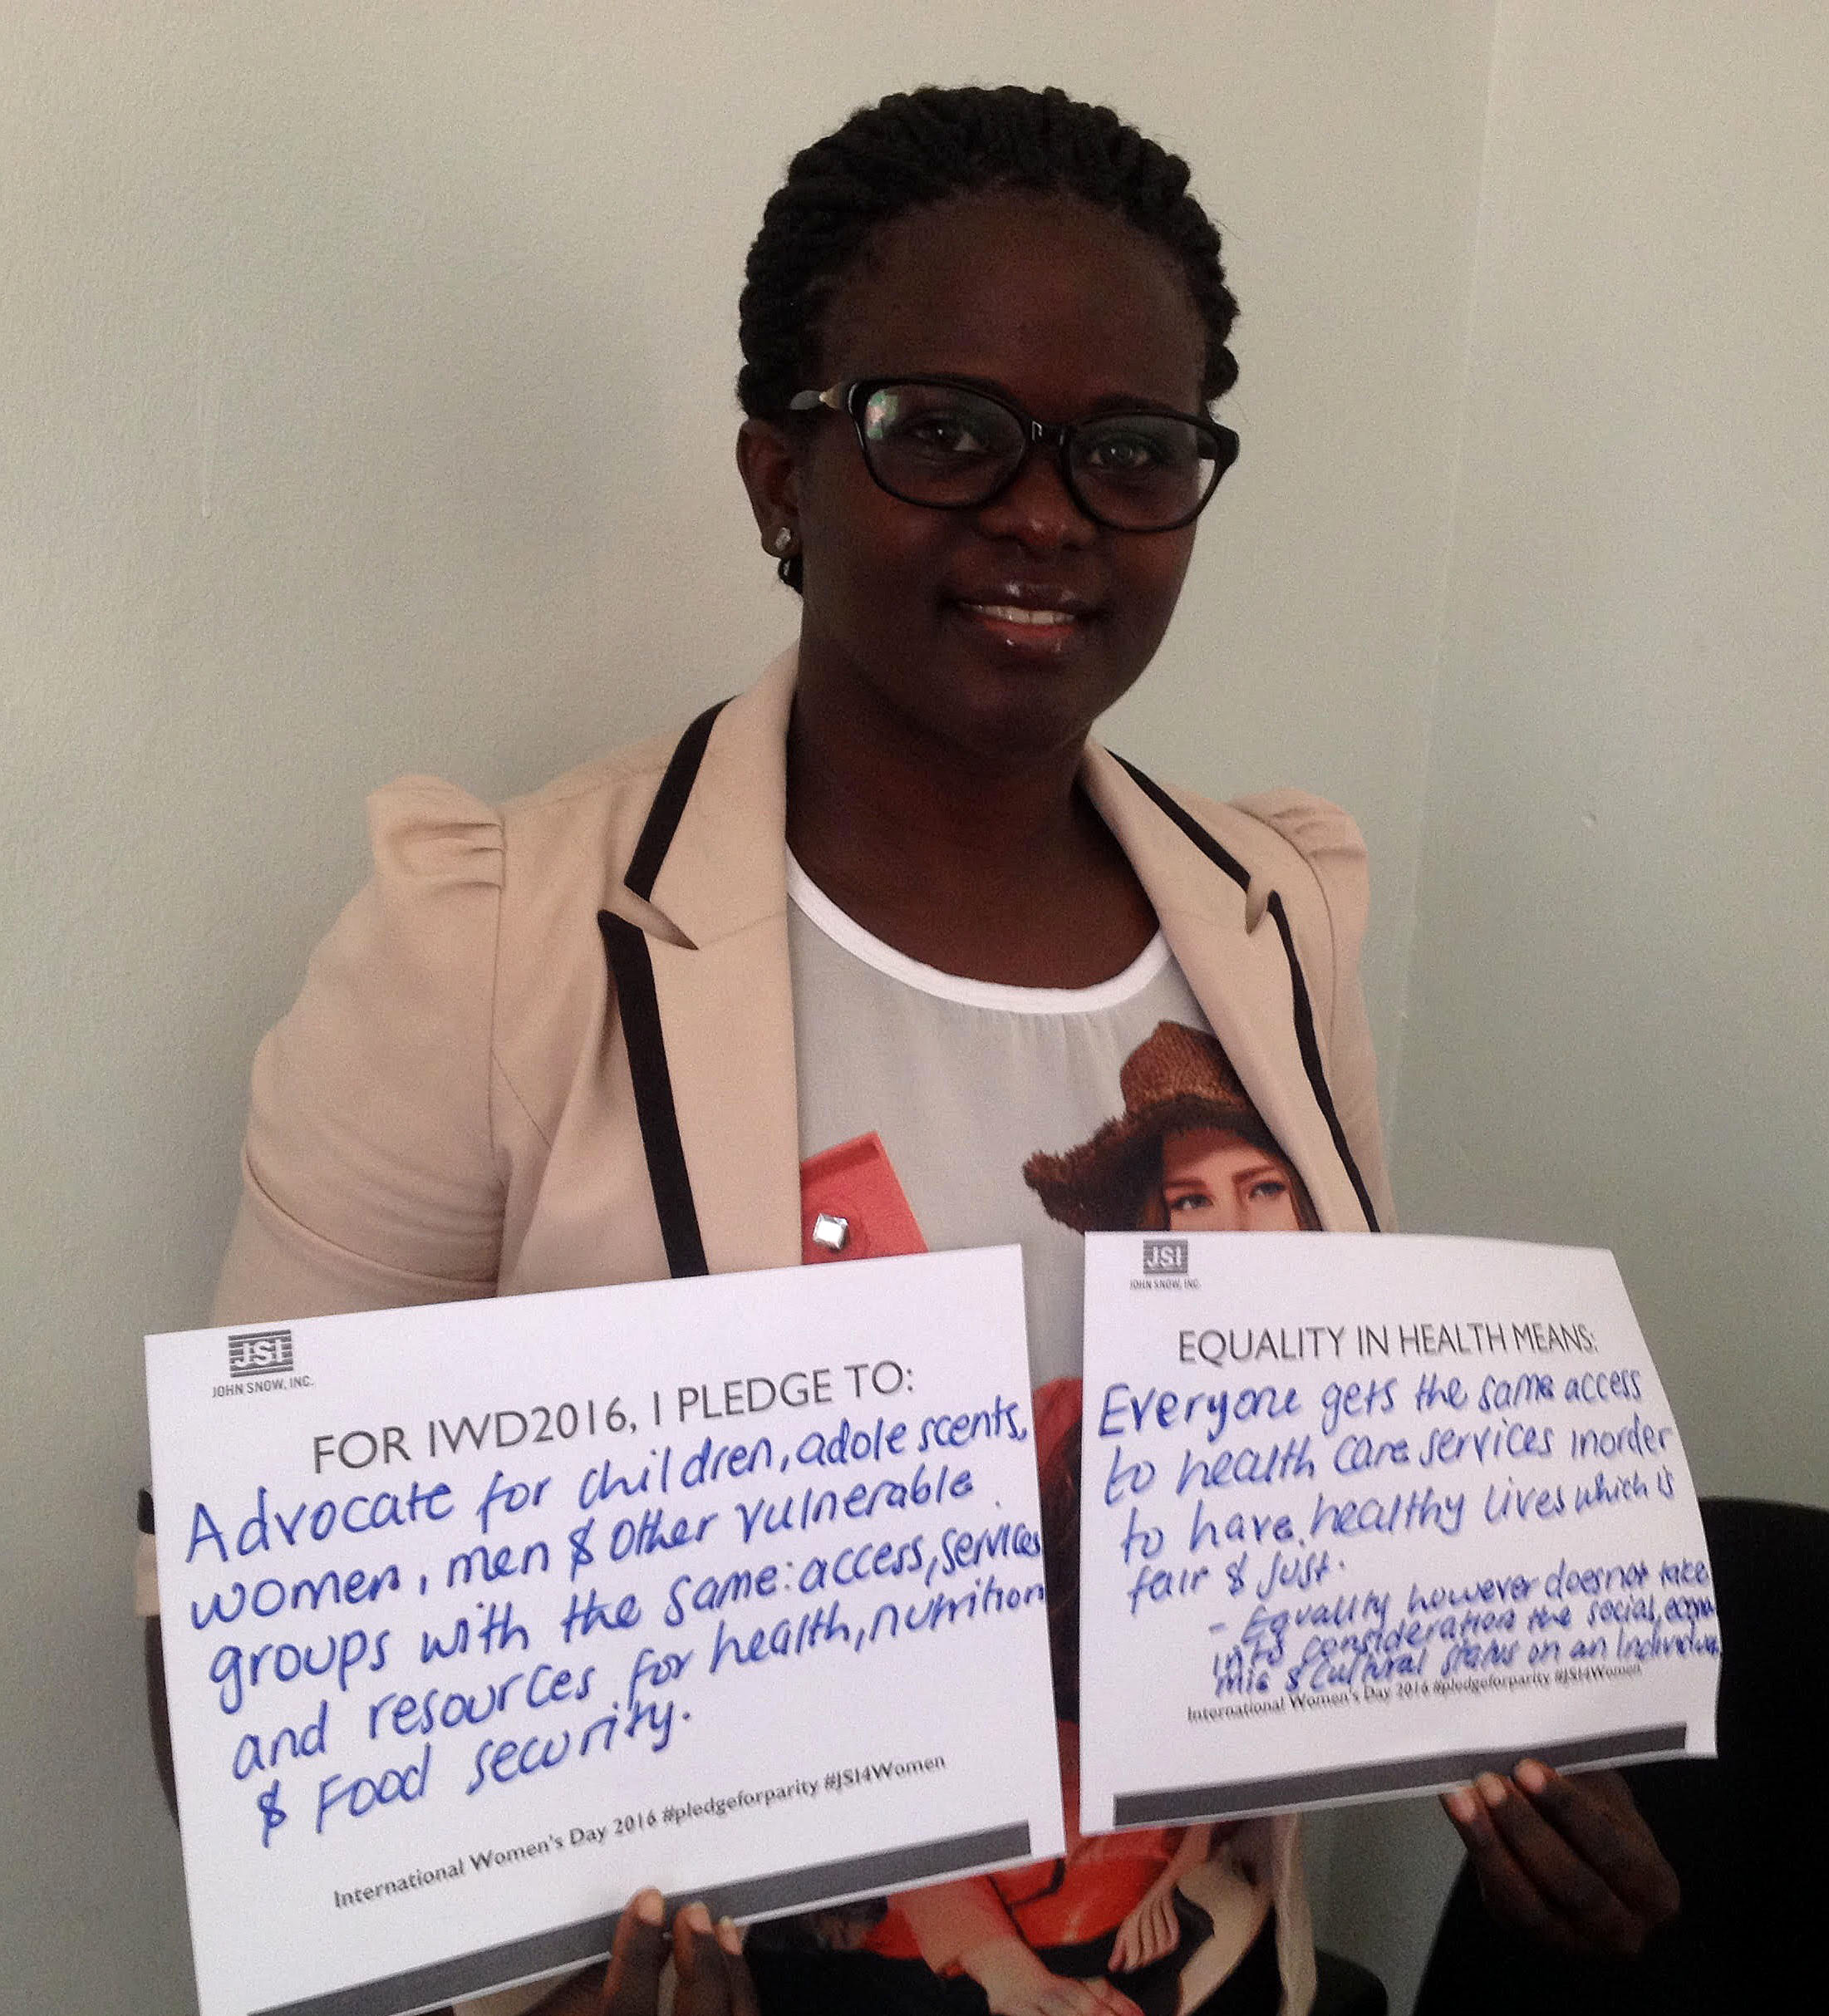 “For IWD ’16, I pledge to advocate for children, adolescents, women, men, and other vulnerable groups with the same: access, services, and resources for health, nutrition, and food security. Equality in health means: everyone gets the same access to health care services in order to have healthy lives, which is fair and just. Equality, however, doesn’t take into consideration the social, economic, and cultural status of an individual”